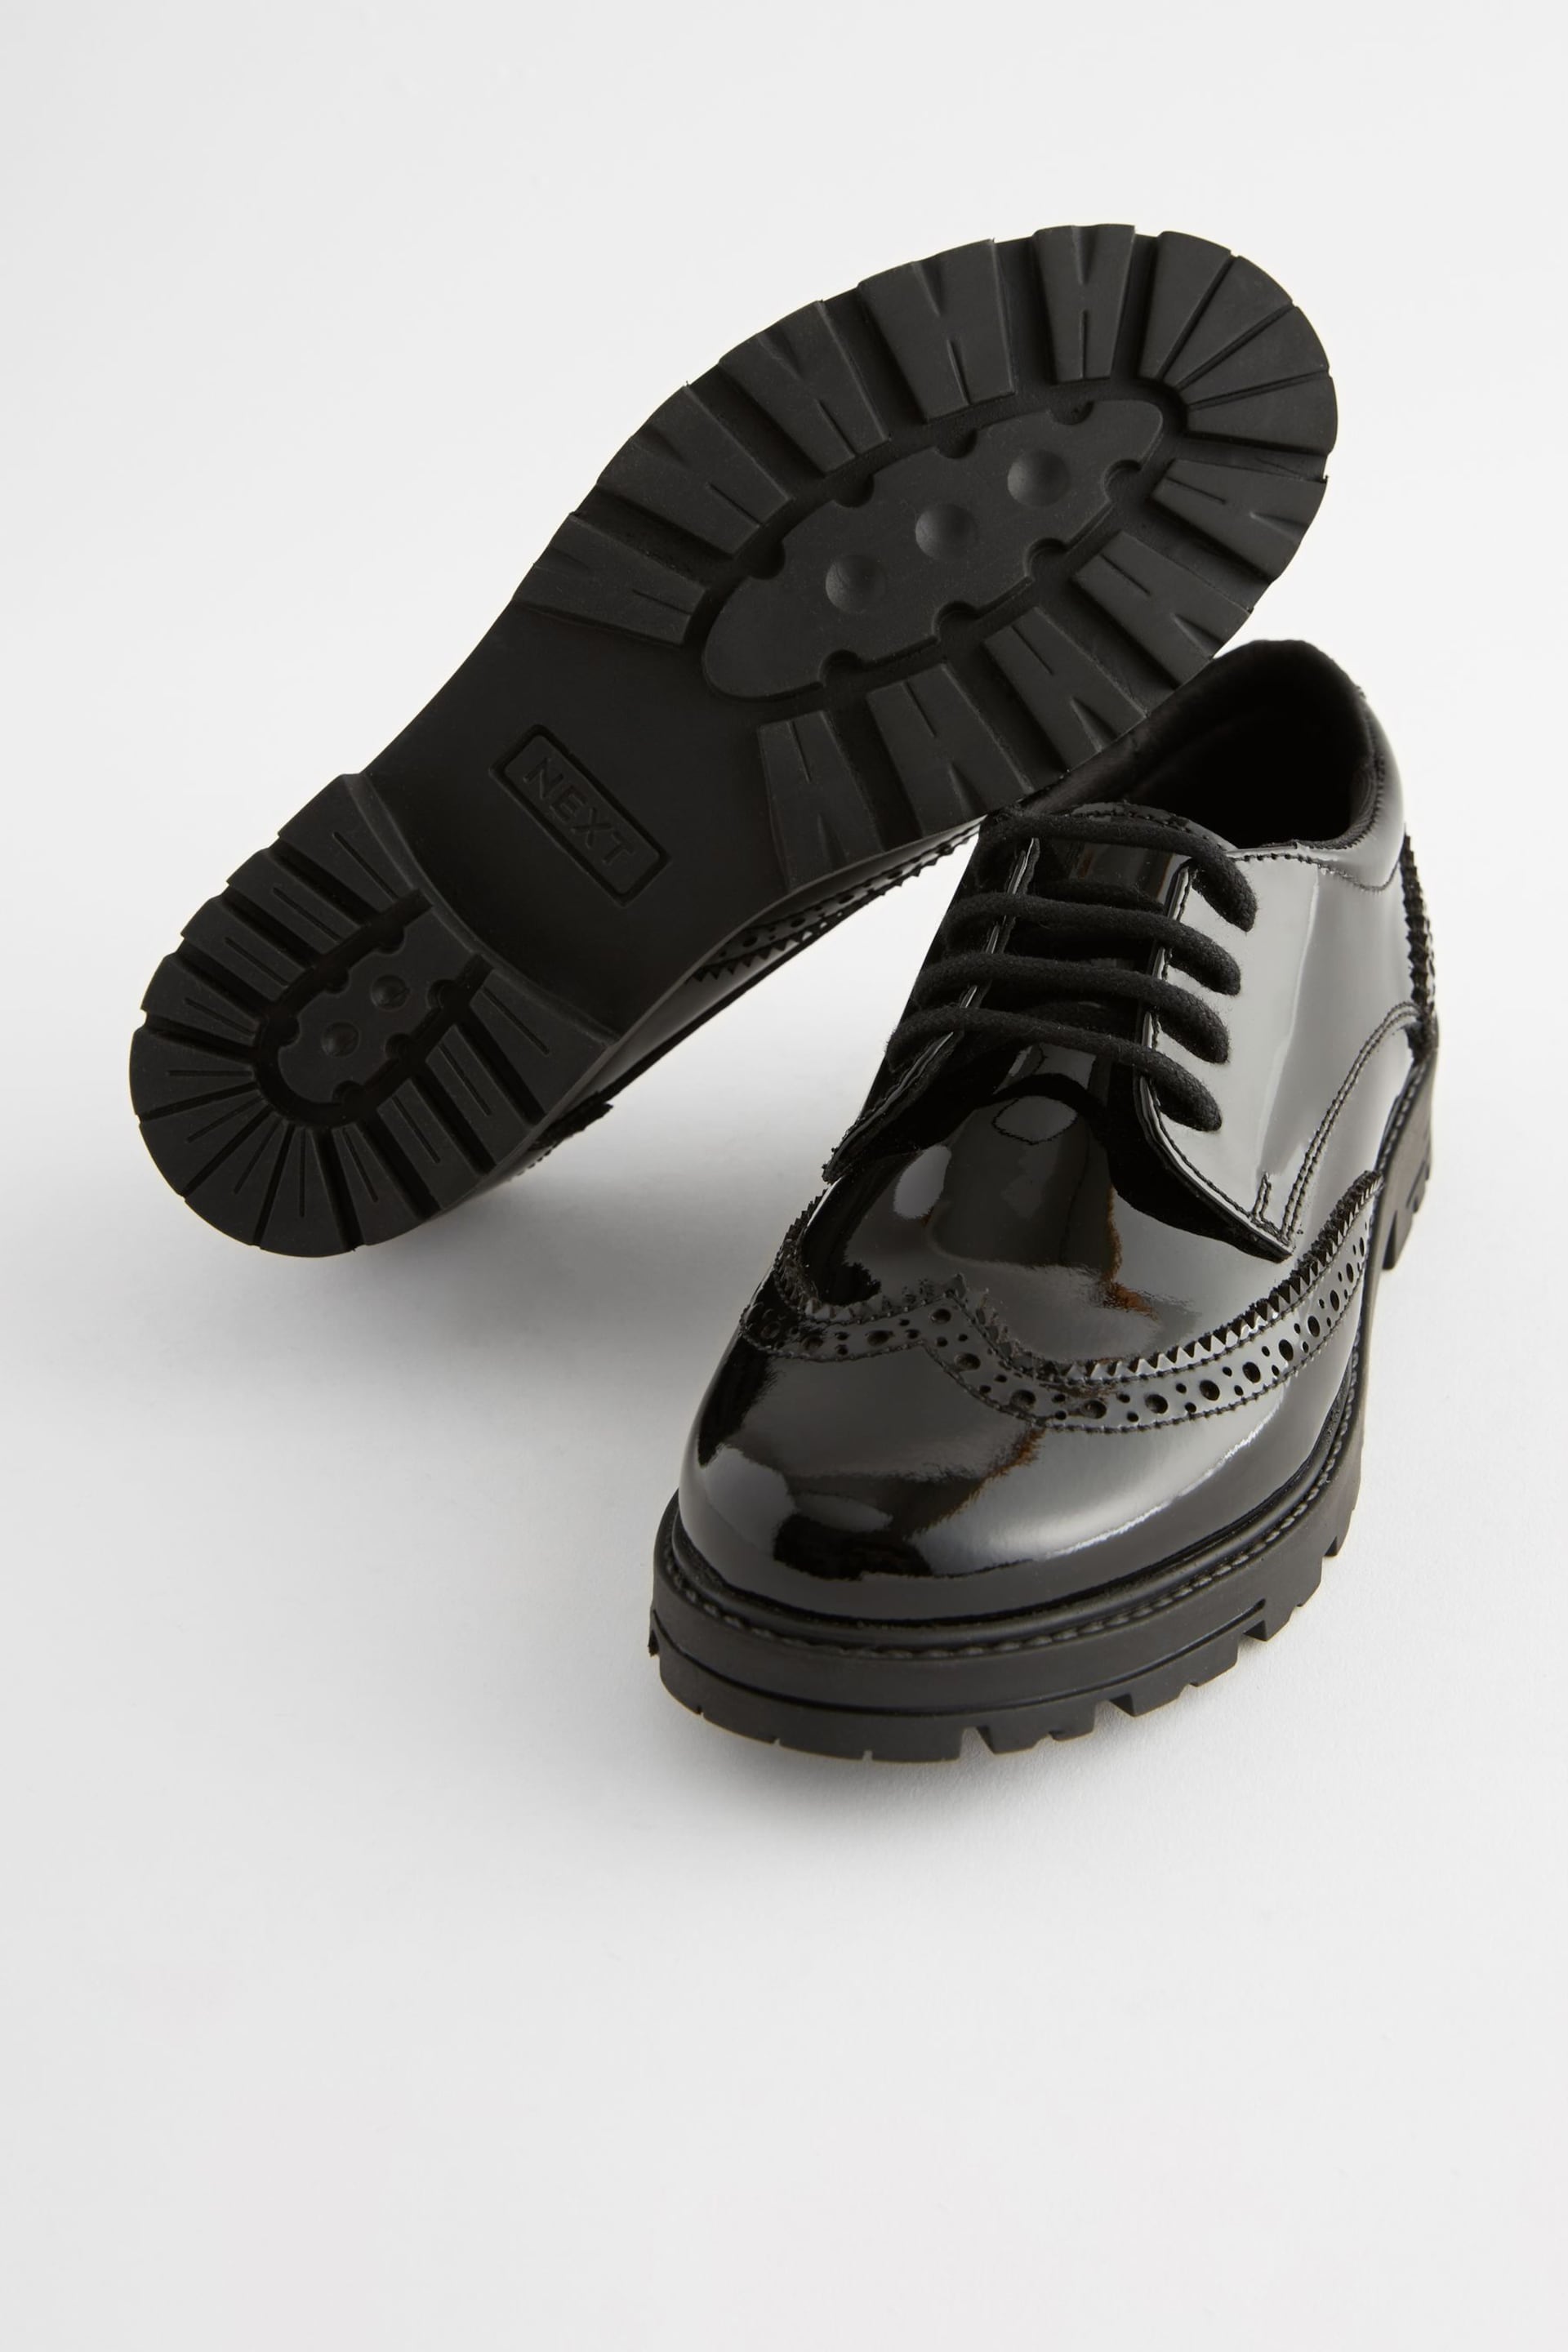 Black Patent Wide Fit (G) School Leather Chunky Lace-Up Brogues - Image 8 of 11